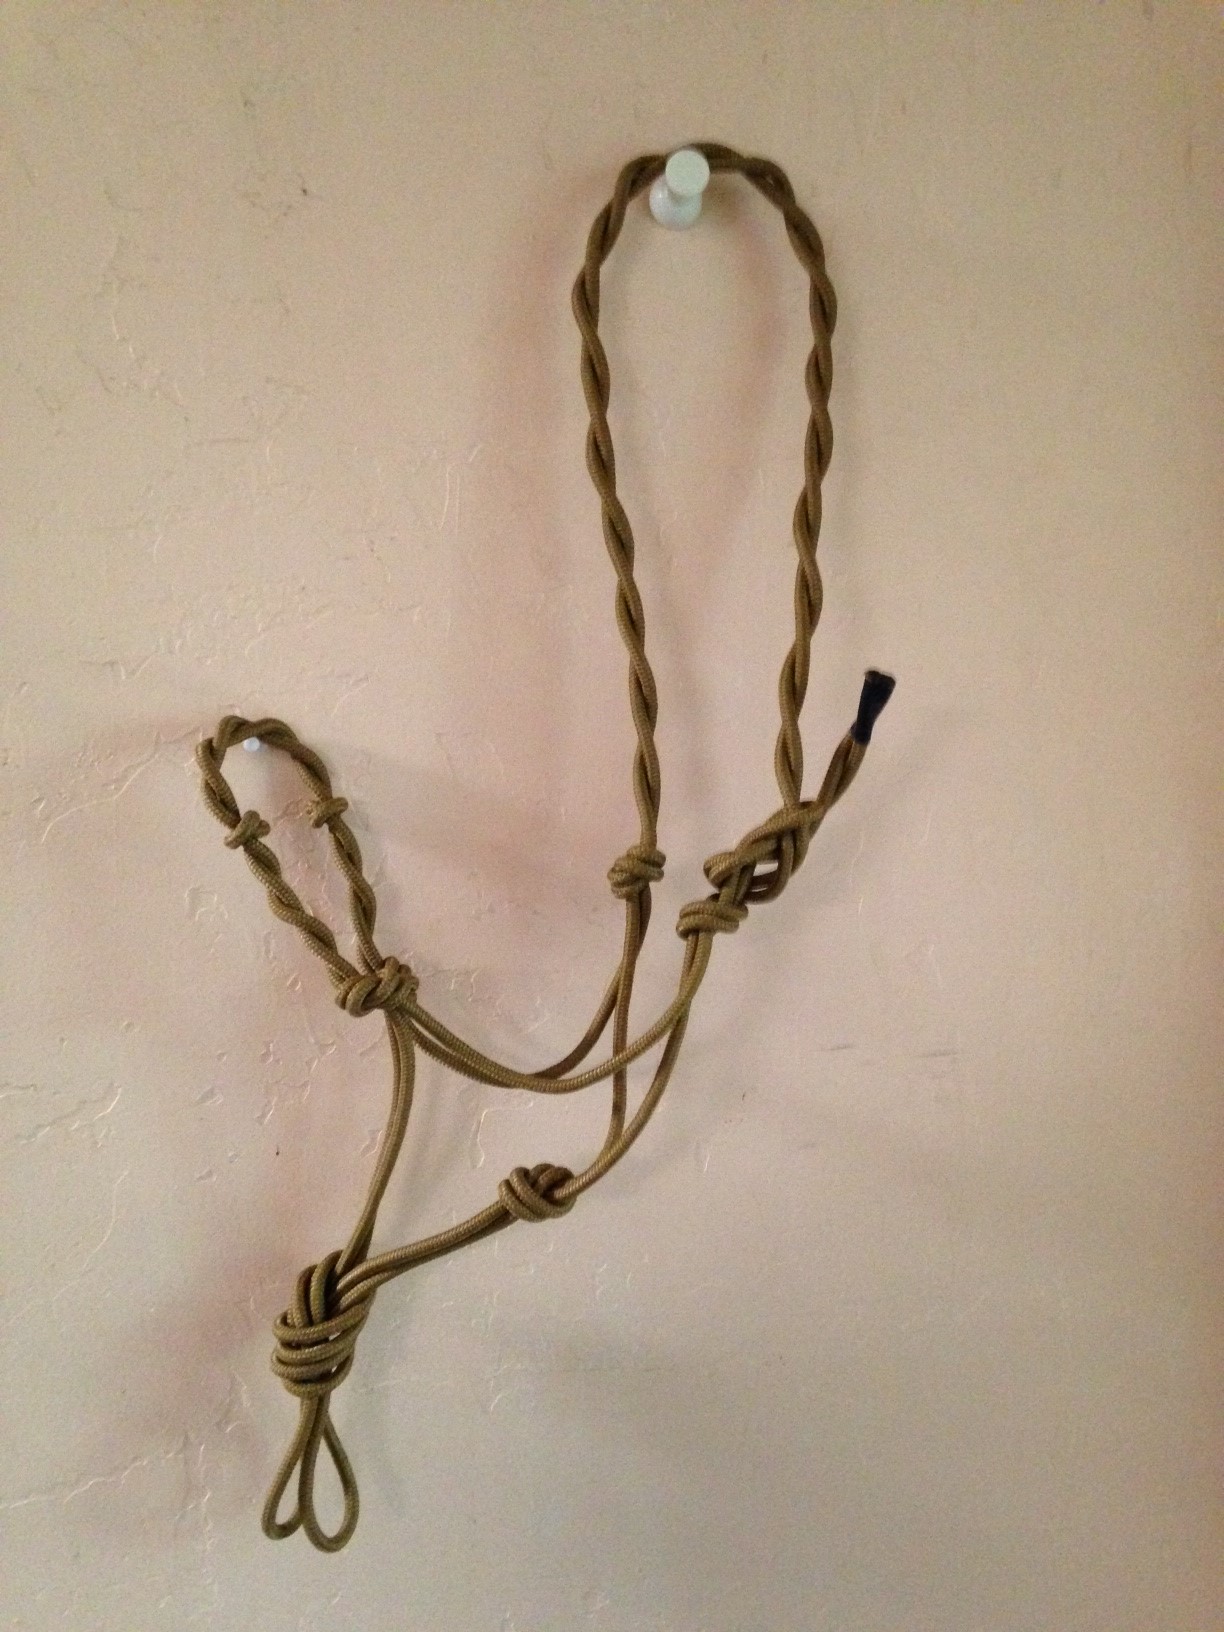 Gold Rope Halter 4 Knot Twisted Bitless Bridle